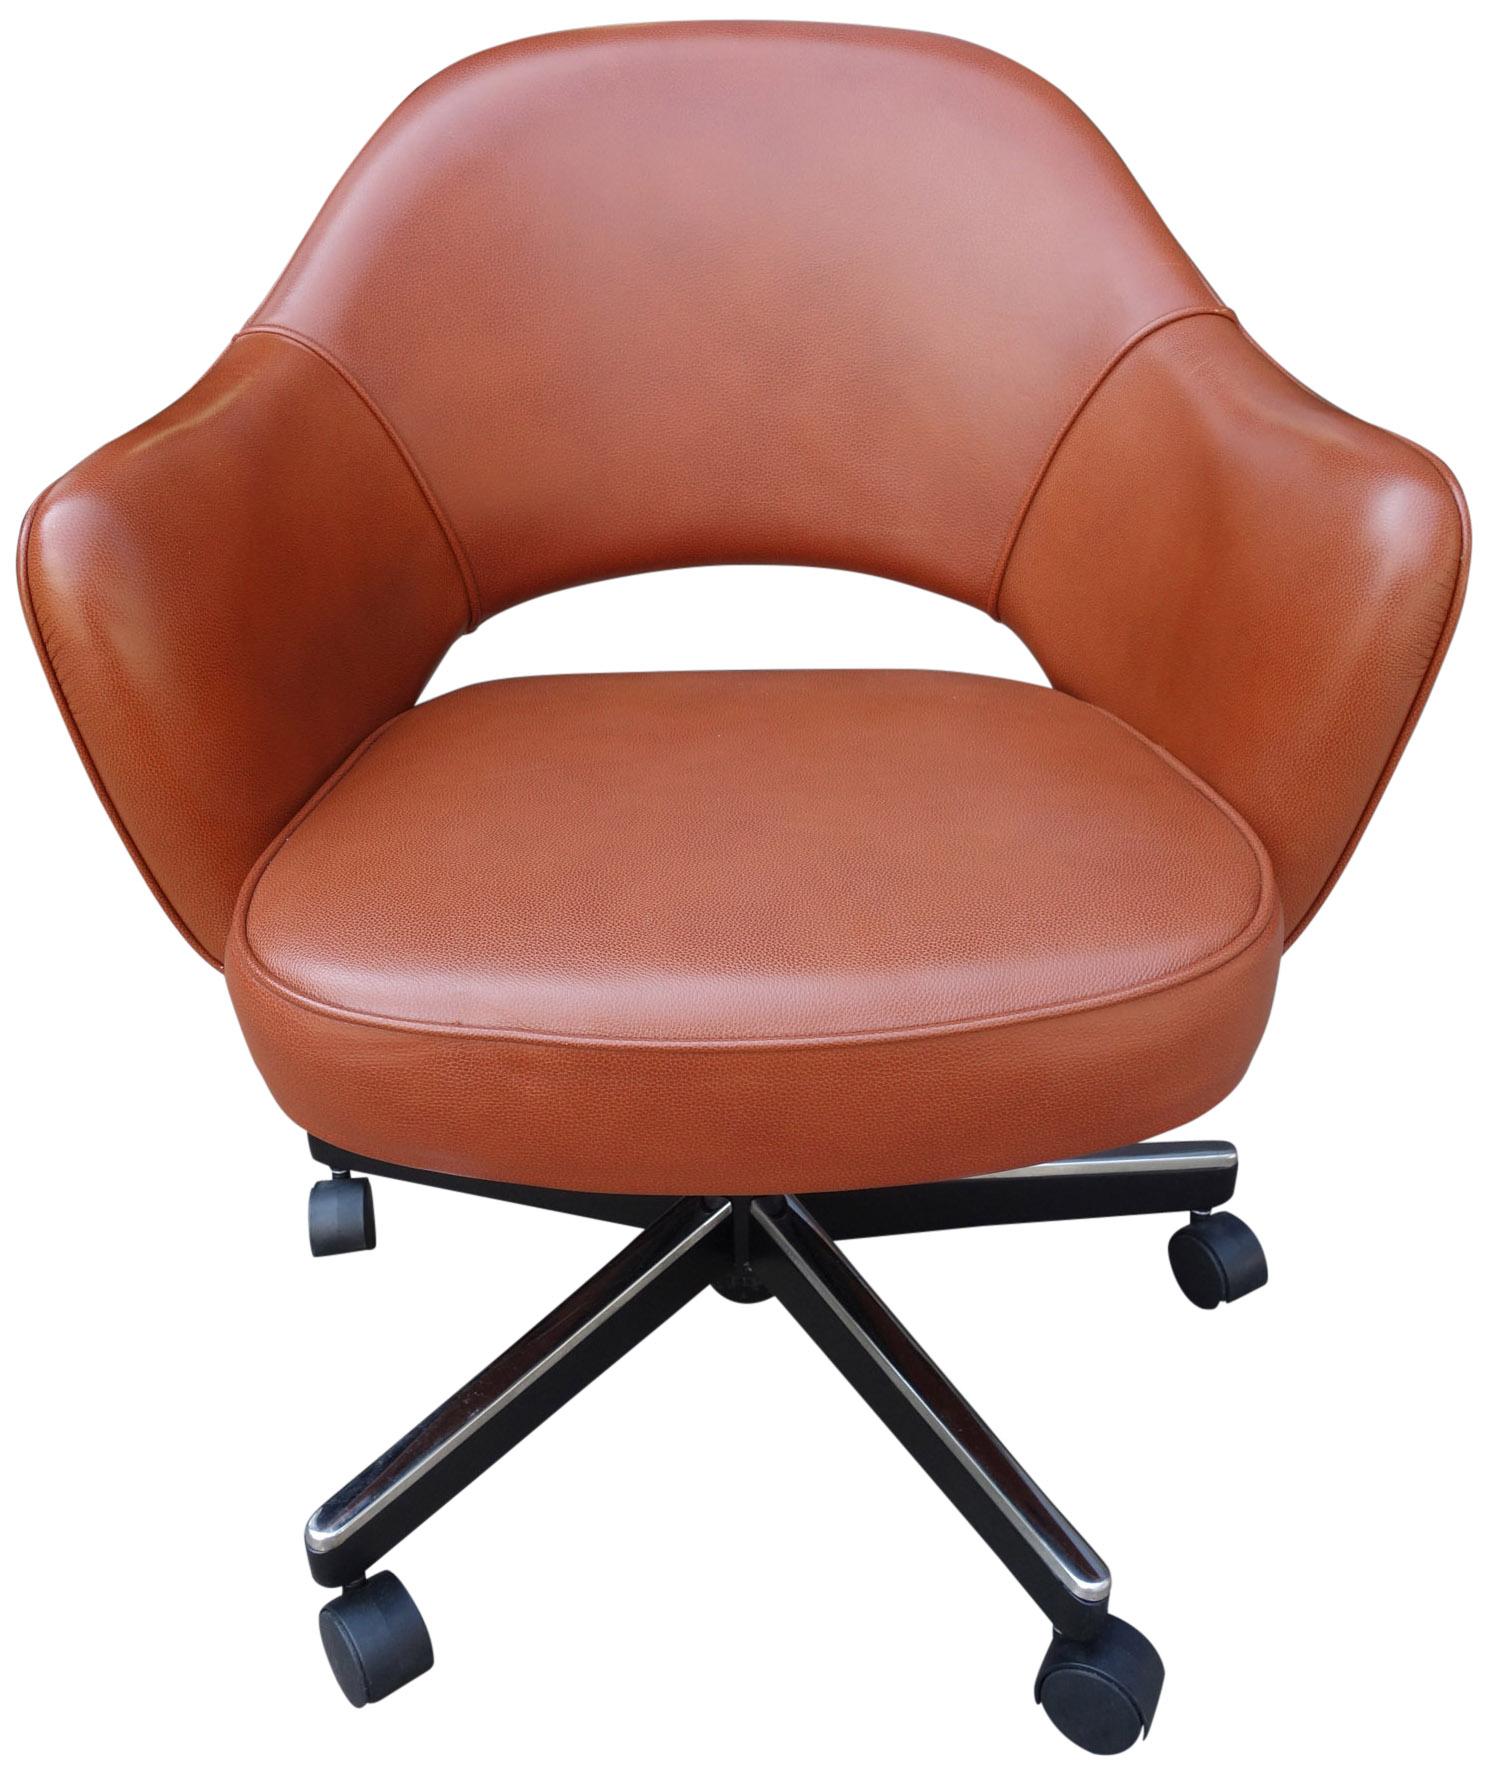 Midcentury Saarinen Executive chairs in reddish brown leather. All with adjustable pneumatic height and tilt positions. This iconic design has been a favorite in both the home and corporate settings due to its sharp looks and comfort. Seat height